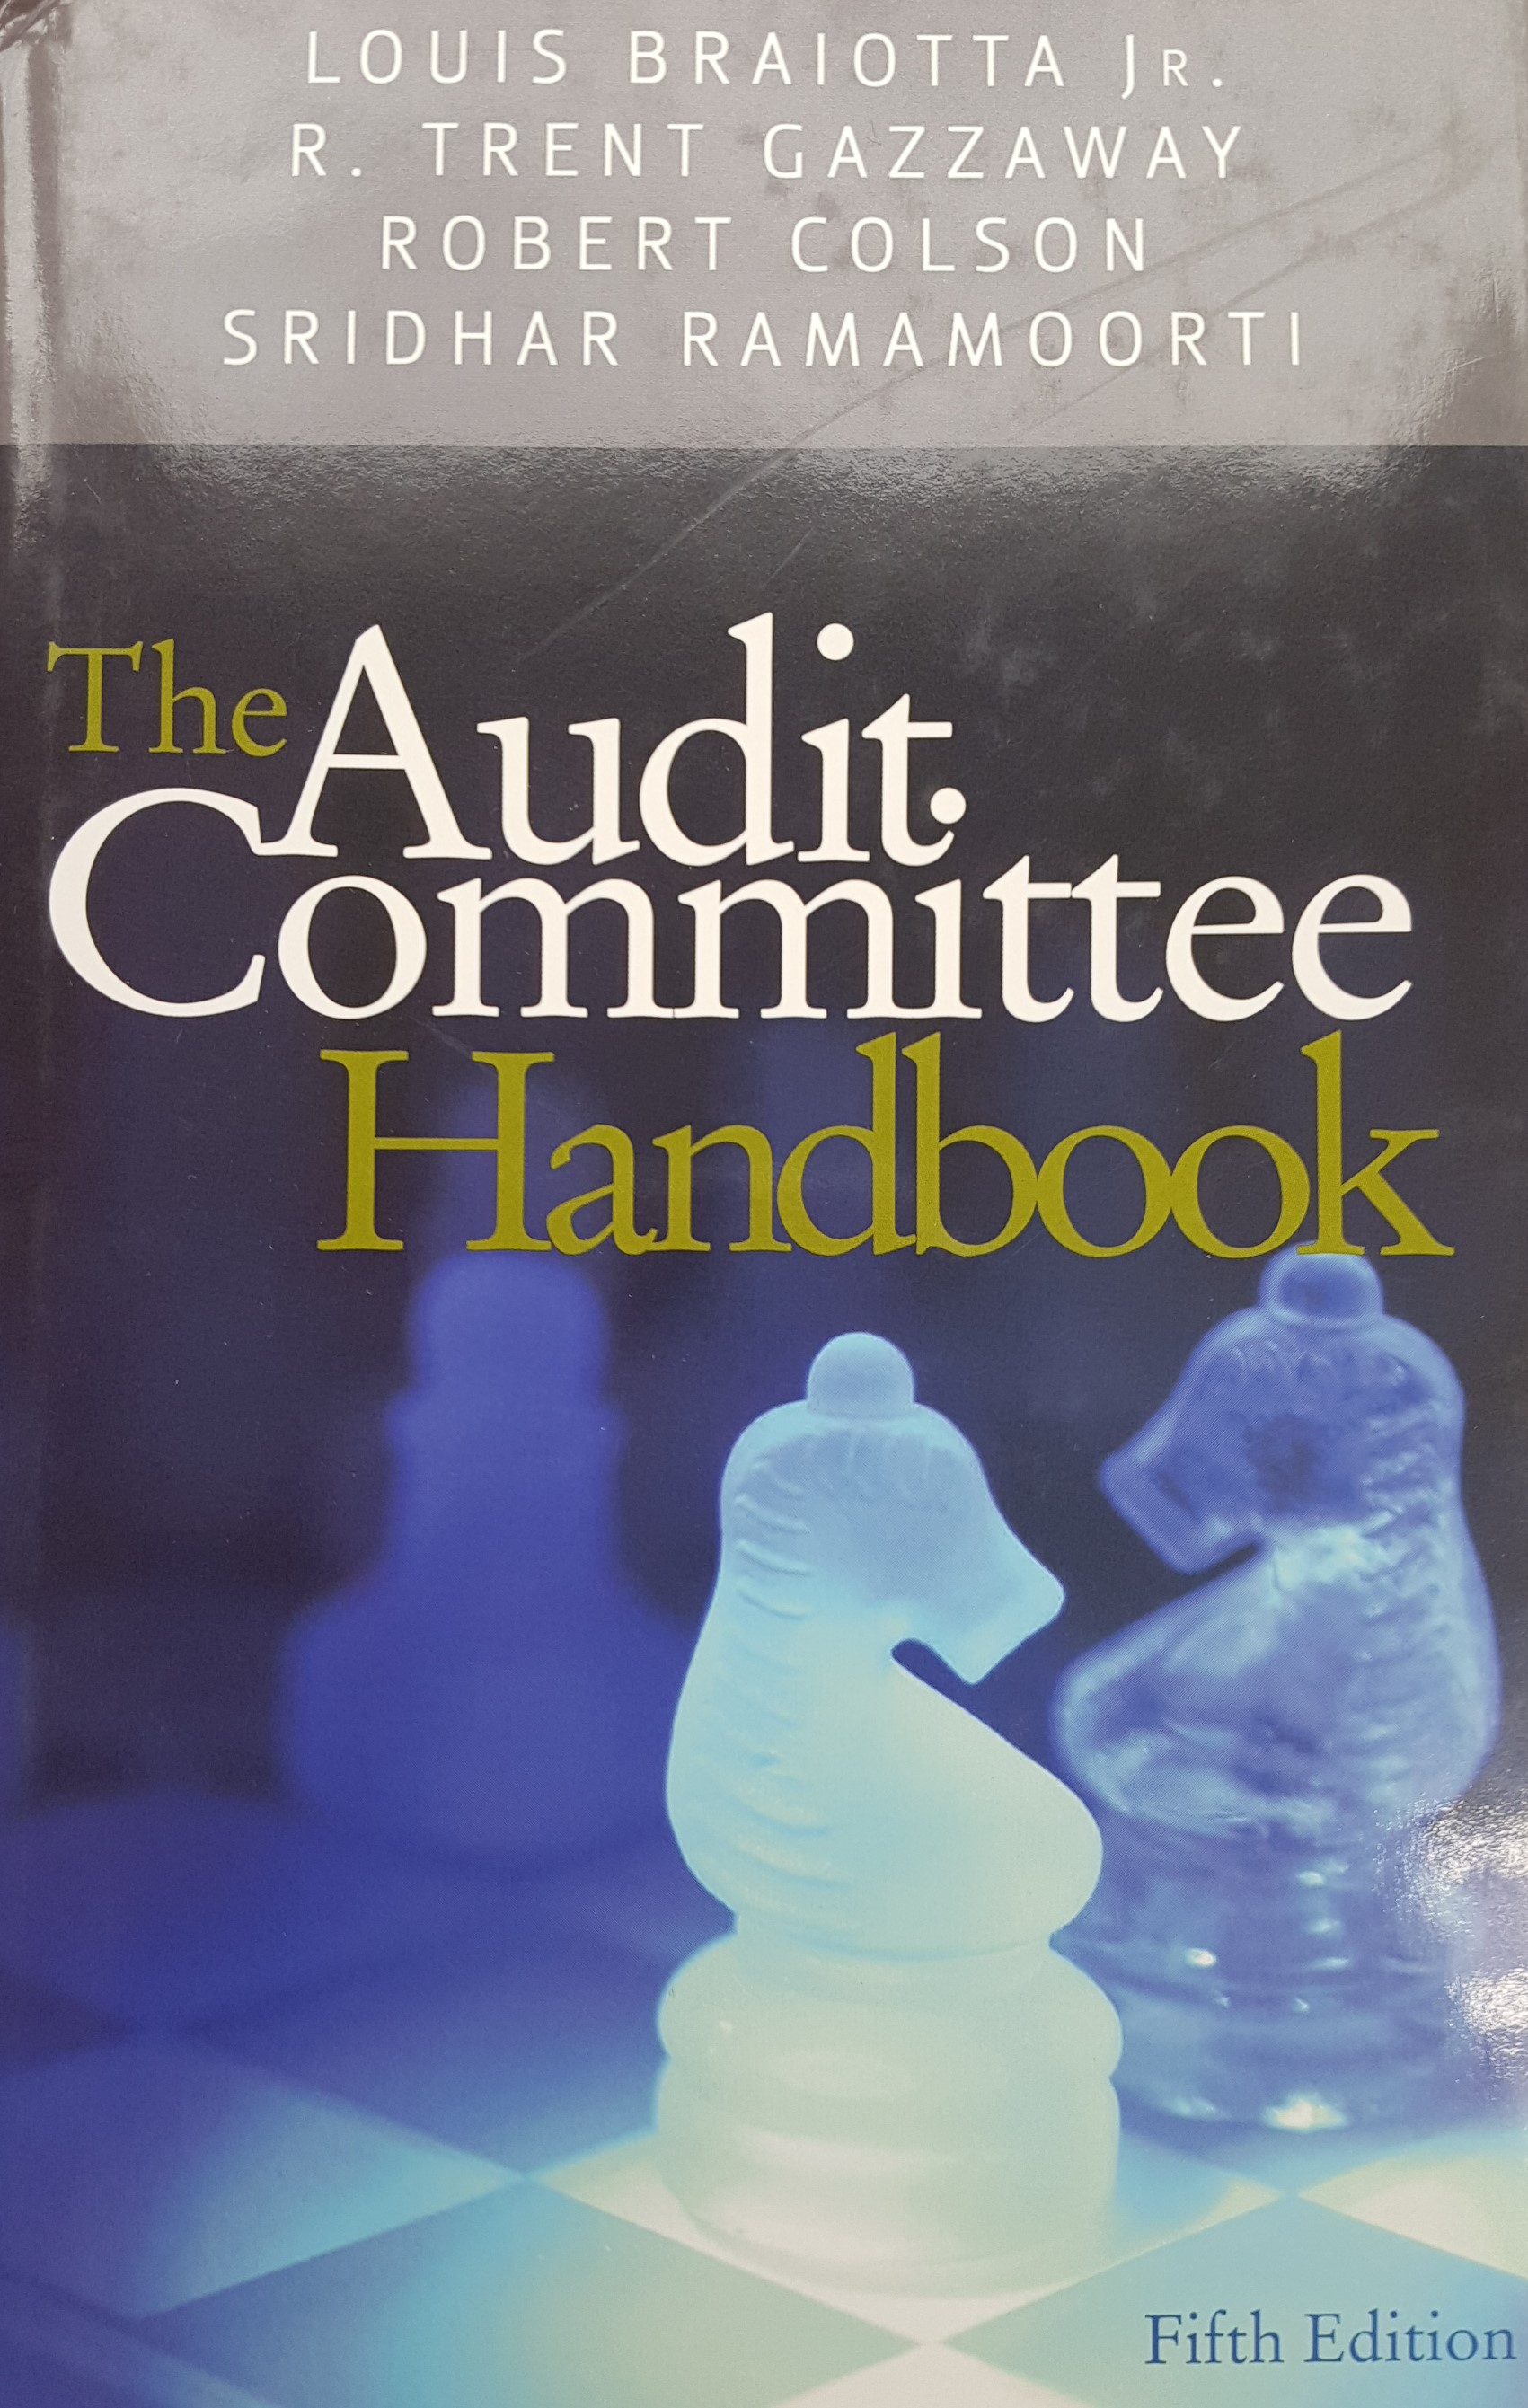 Description The Audit Committee Handbook, 5th Edition